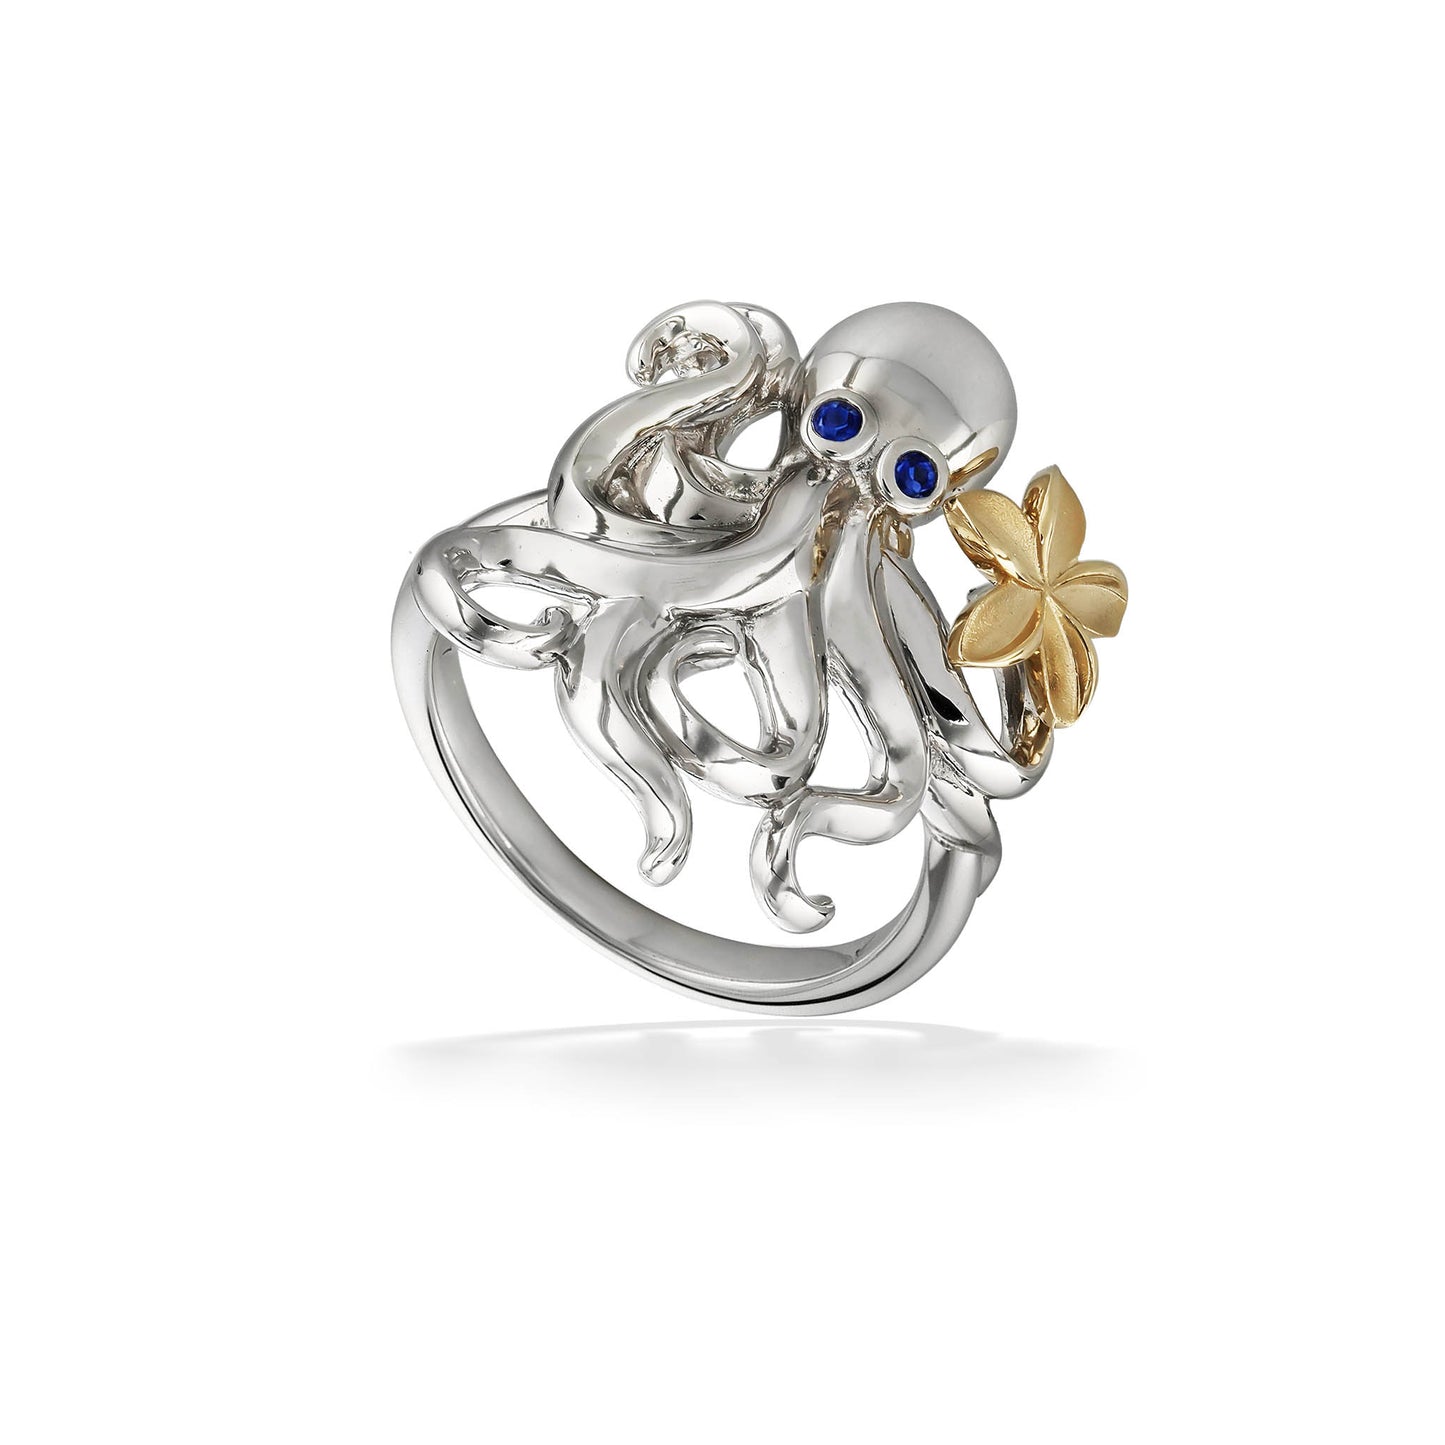 44736 - 14K Yellow Gold and Sterling Silver - Octopus and Plumeria Ring